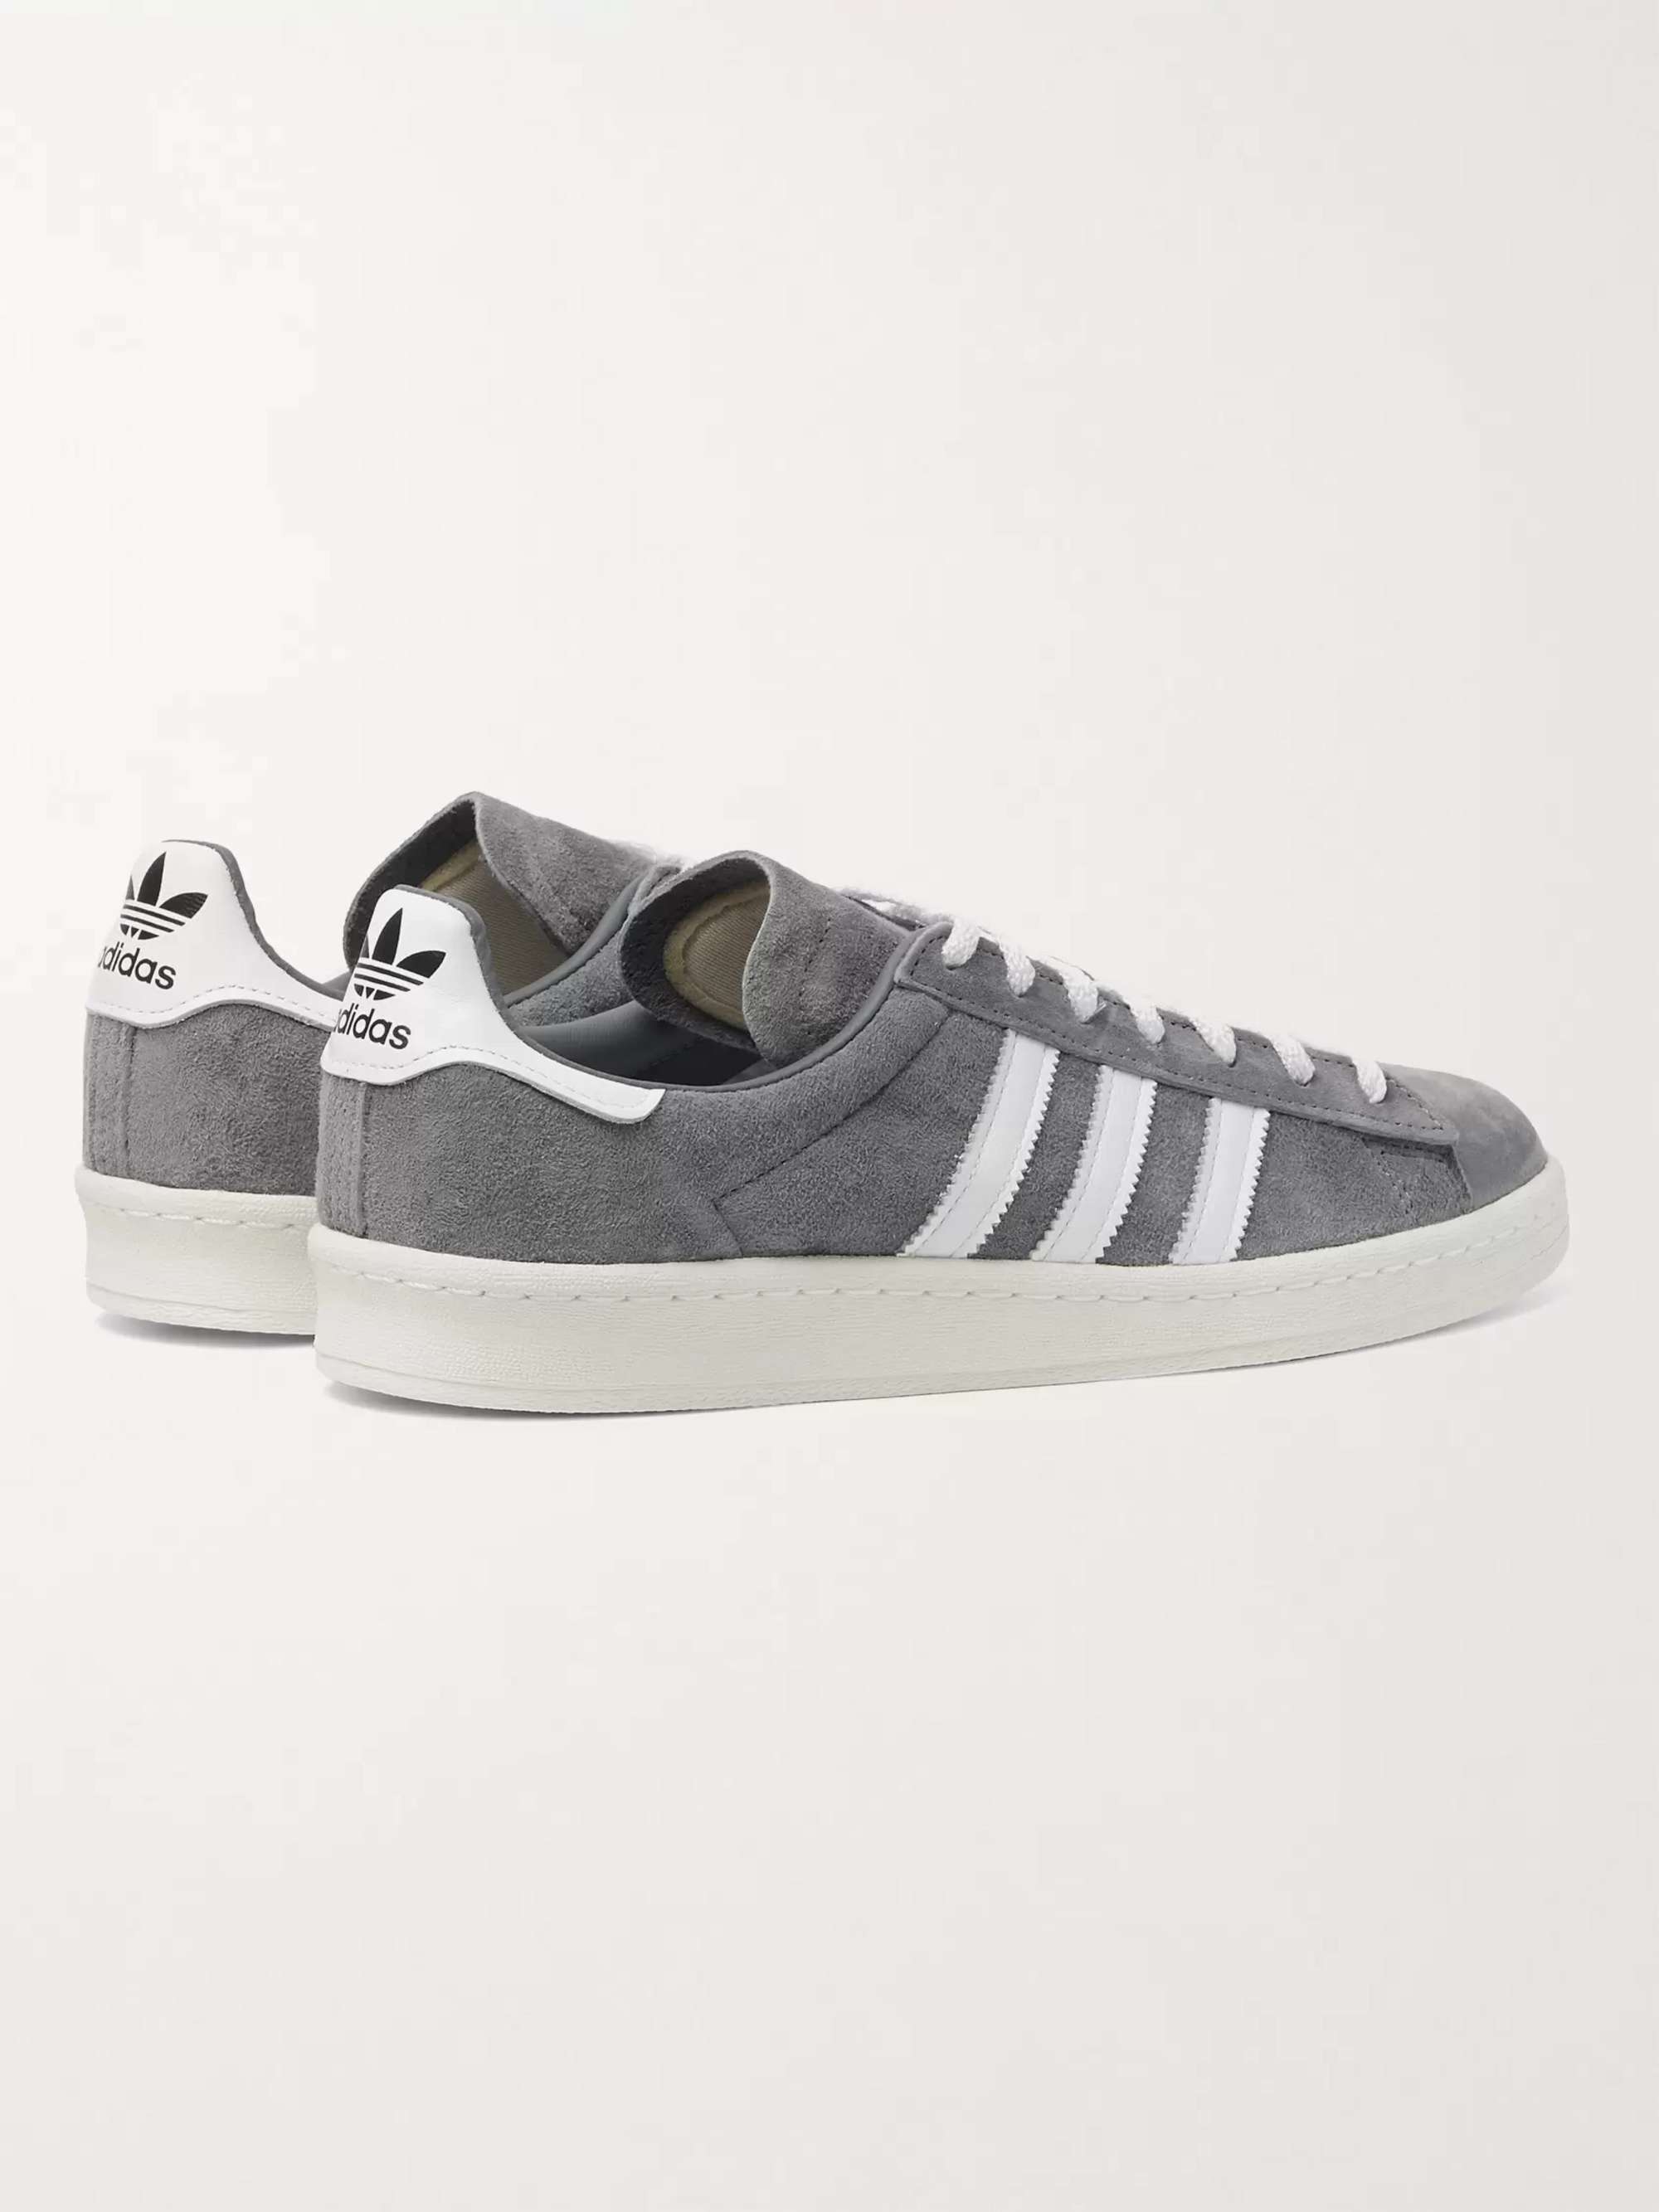 Gray Campus 80s Leather-Trimmed Suede Sneakers | ADIDAS MR